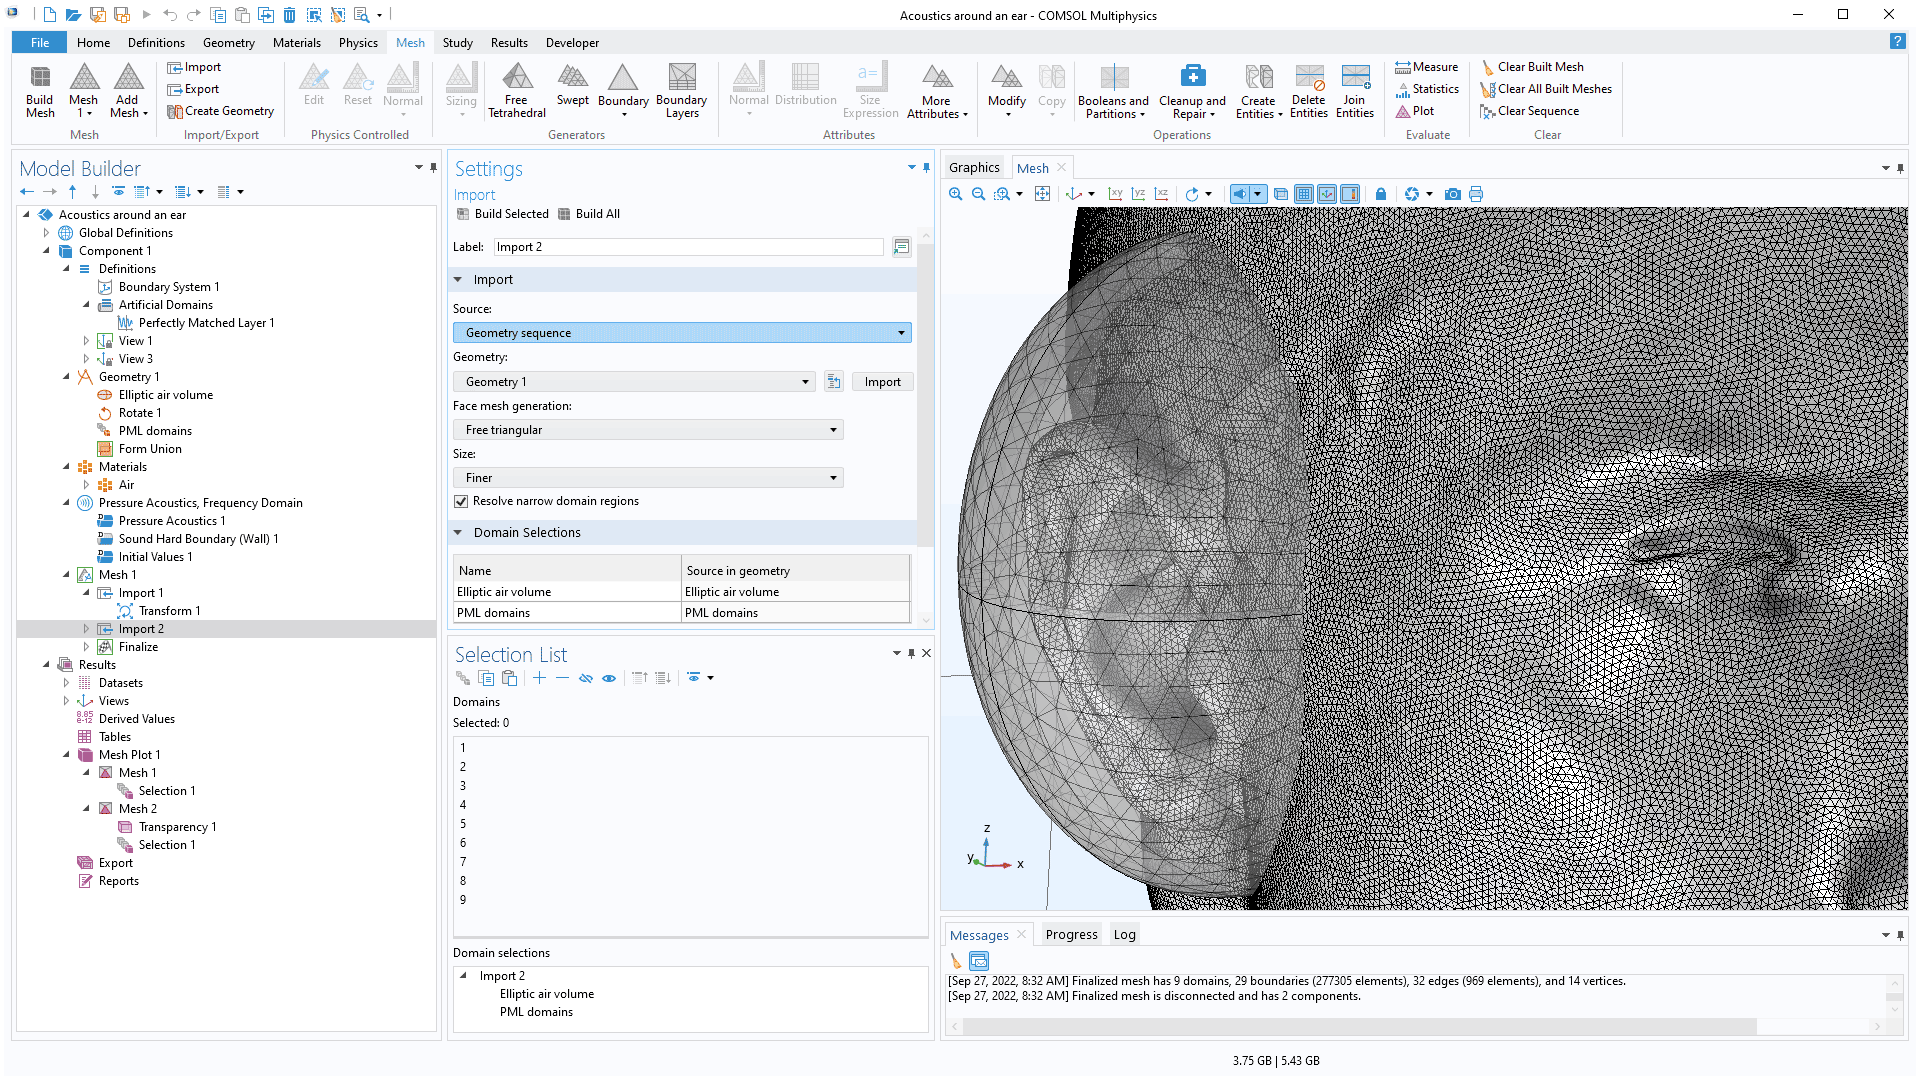 The COMSOL Multiphysics UI showing the Model Builder with the Import 2 operation selected, the corresponding Settings window, and the Graphics window with a mesh of a human head.